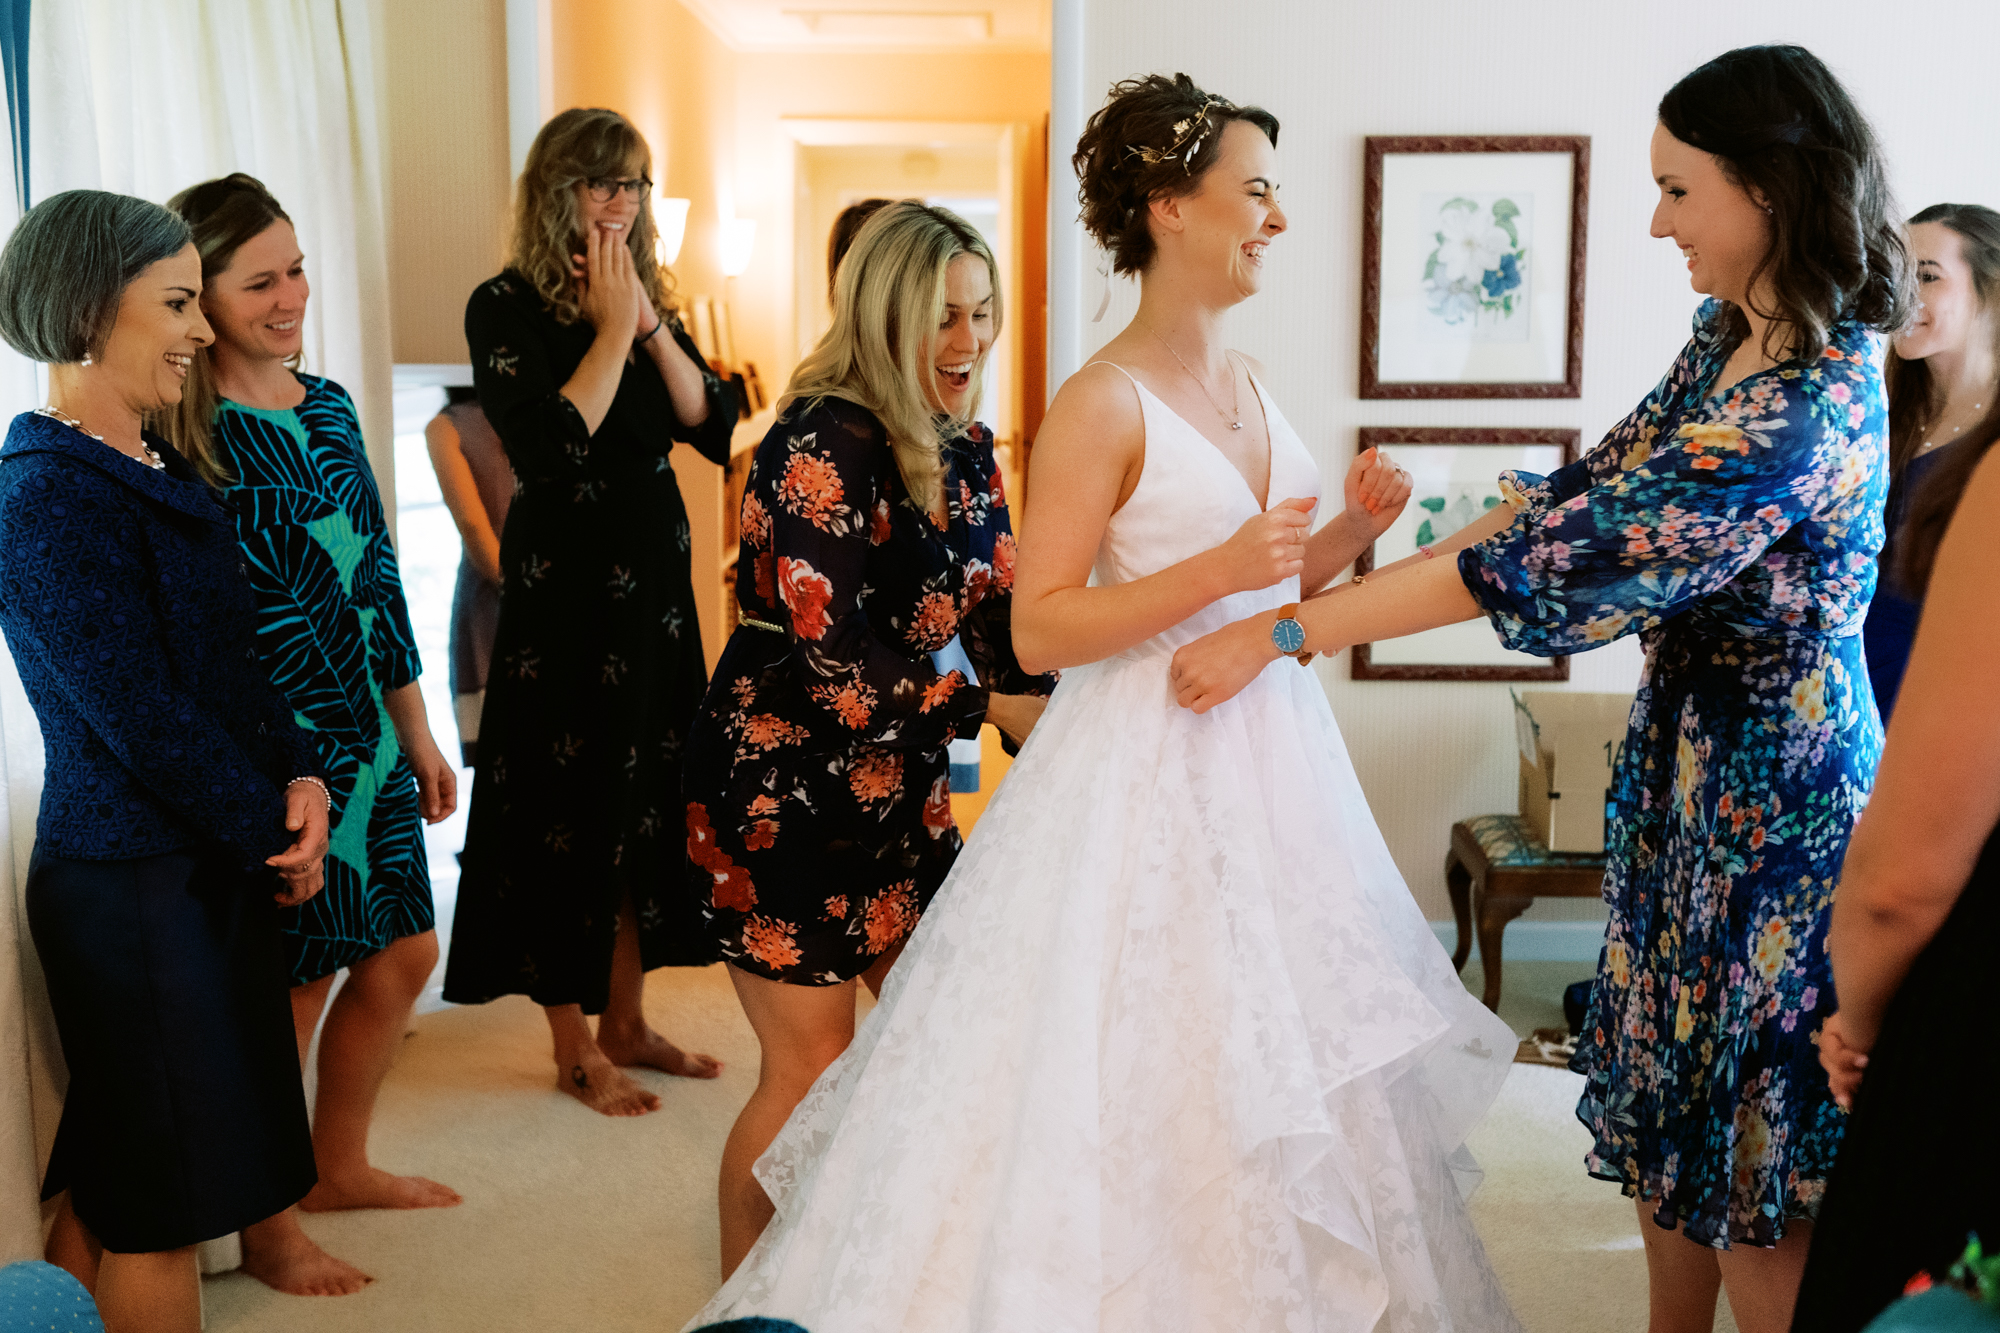 Bride Amy gets ready with her bridesmaids